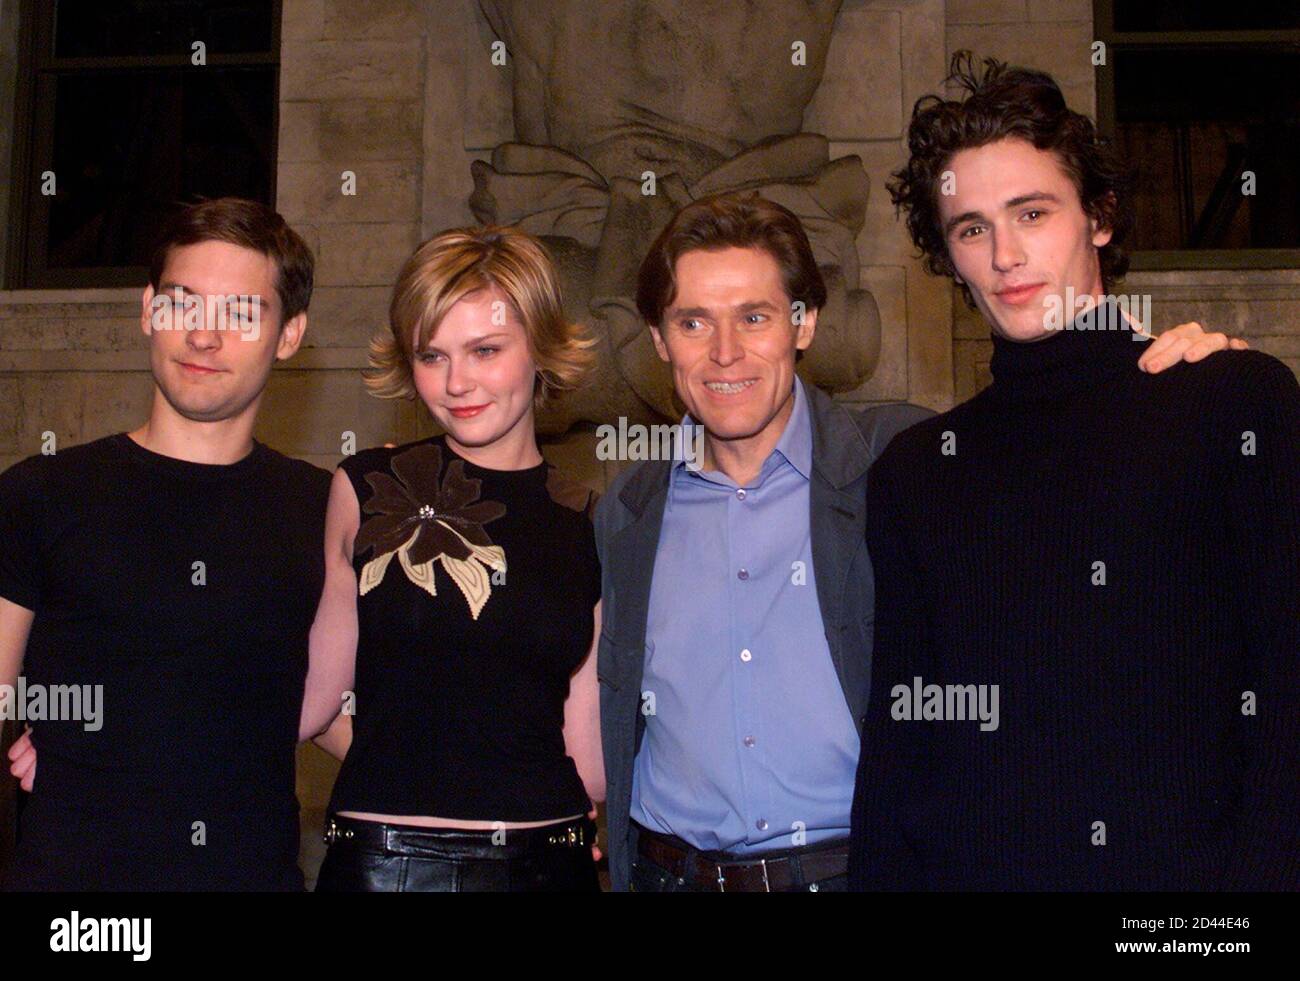 Kirsten dunst james franco hi-res stock photography and images - Alamy